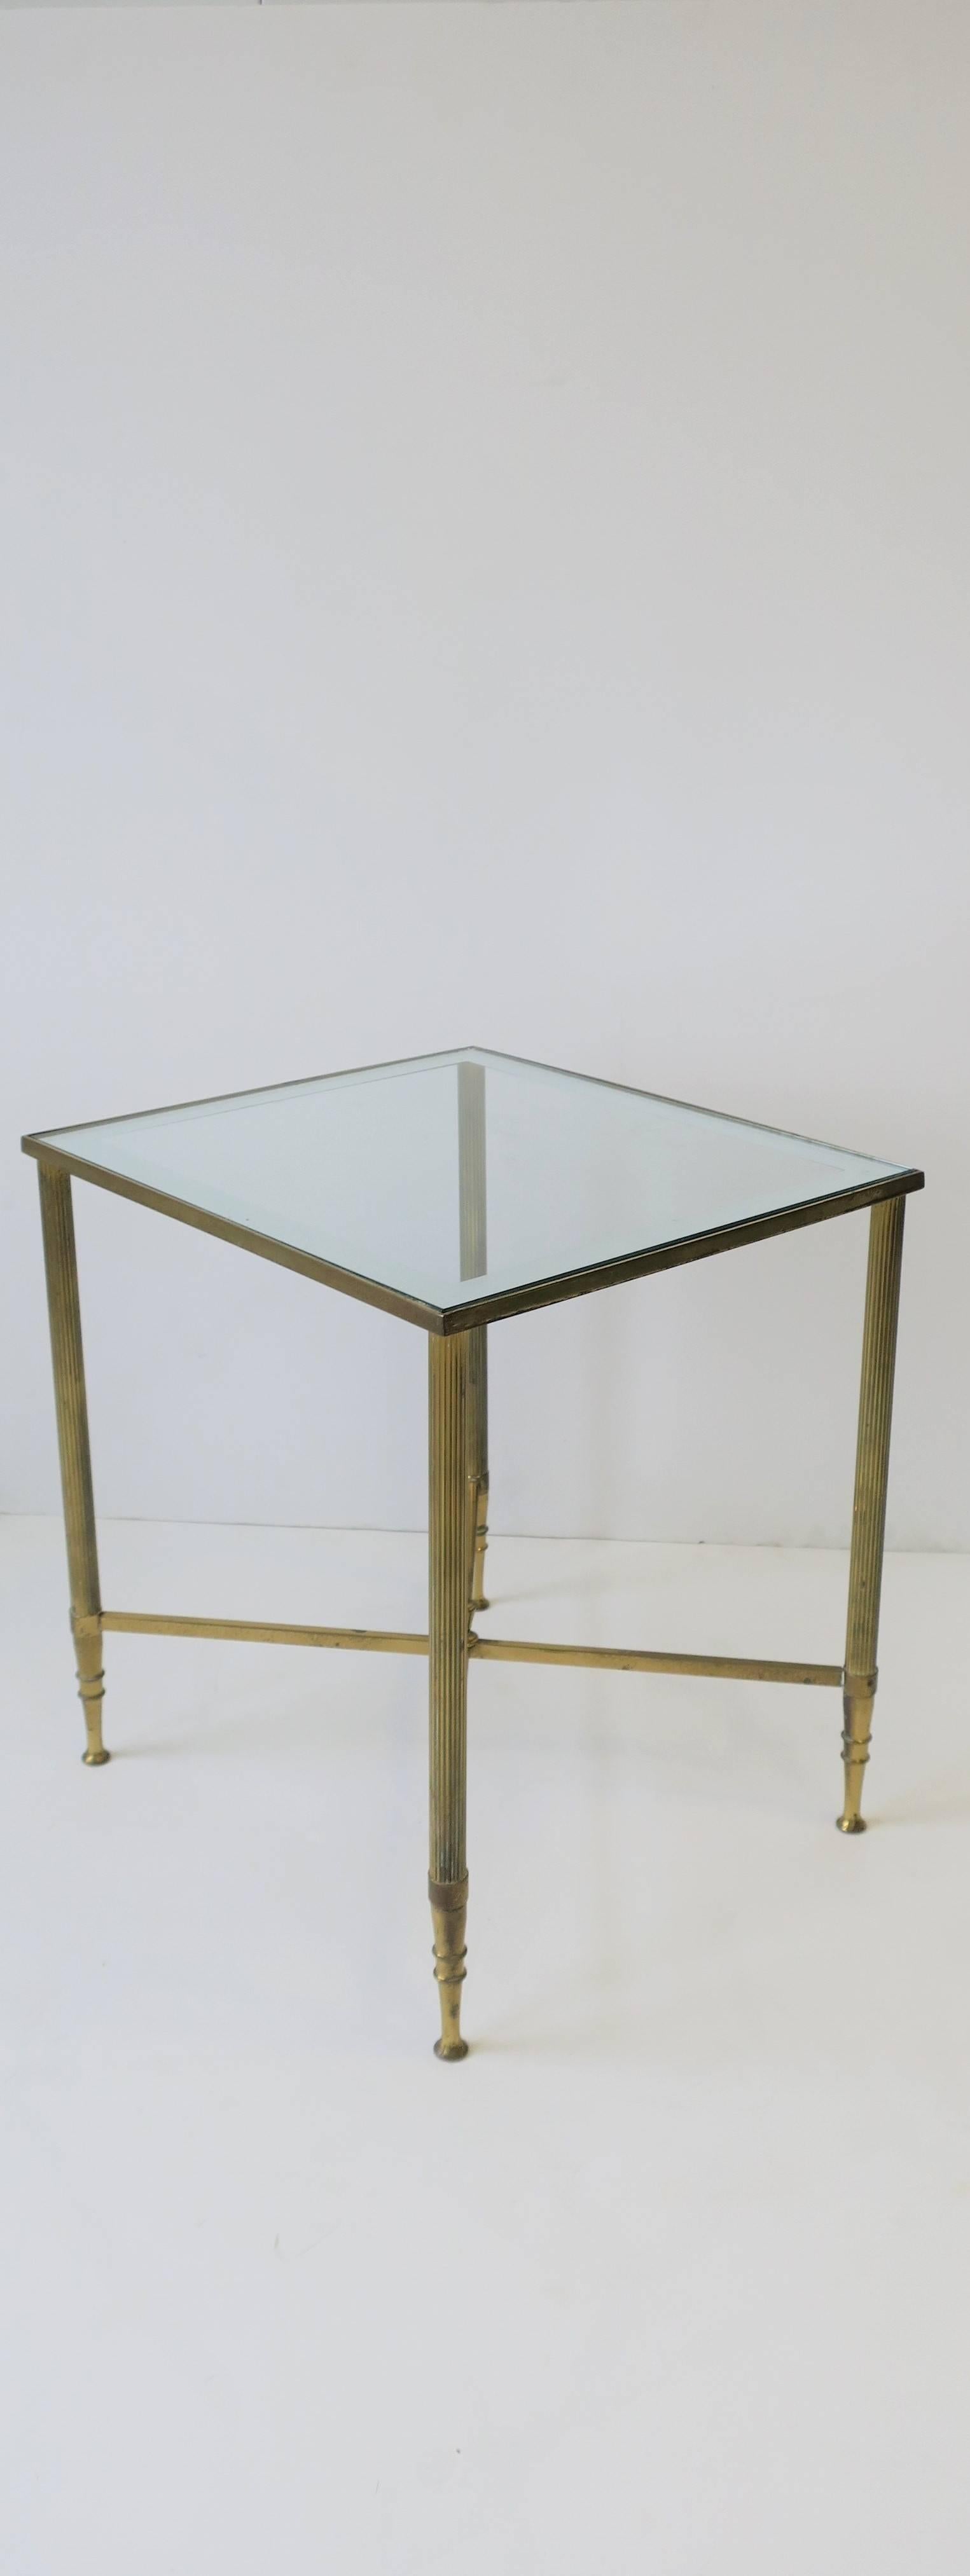 A small and beautiful Italian brass and glass side table, drinks table. or small end table, in the Directoire style after design house Maison Jansen, mid-20th century, circa 1960s, Italy. Table has an inset glass top with mirrored edge and stretcher